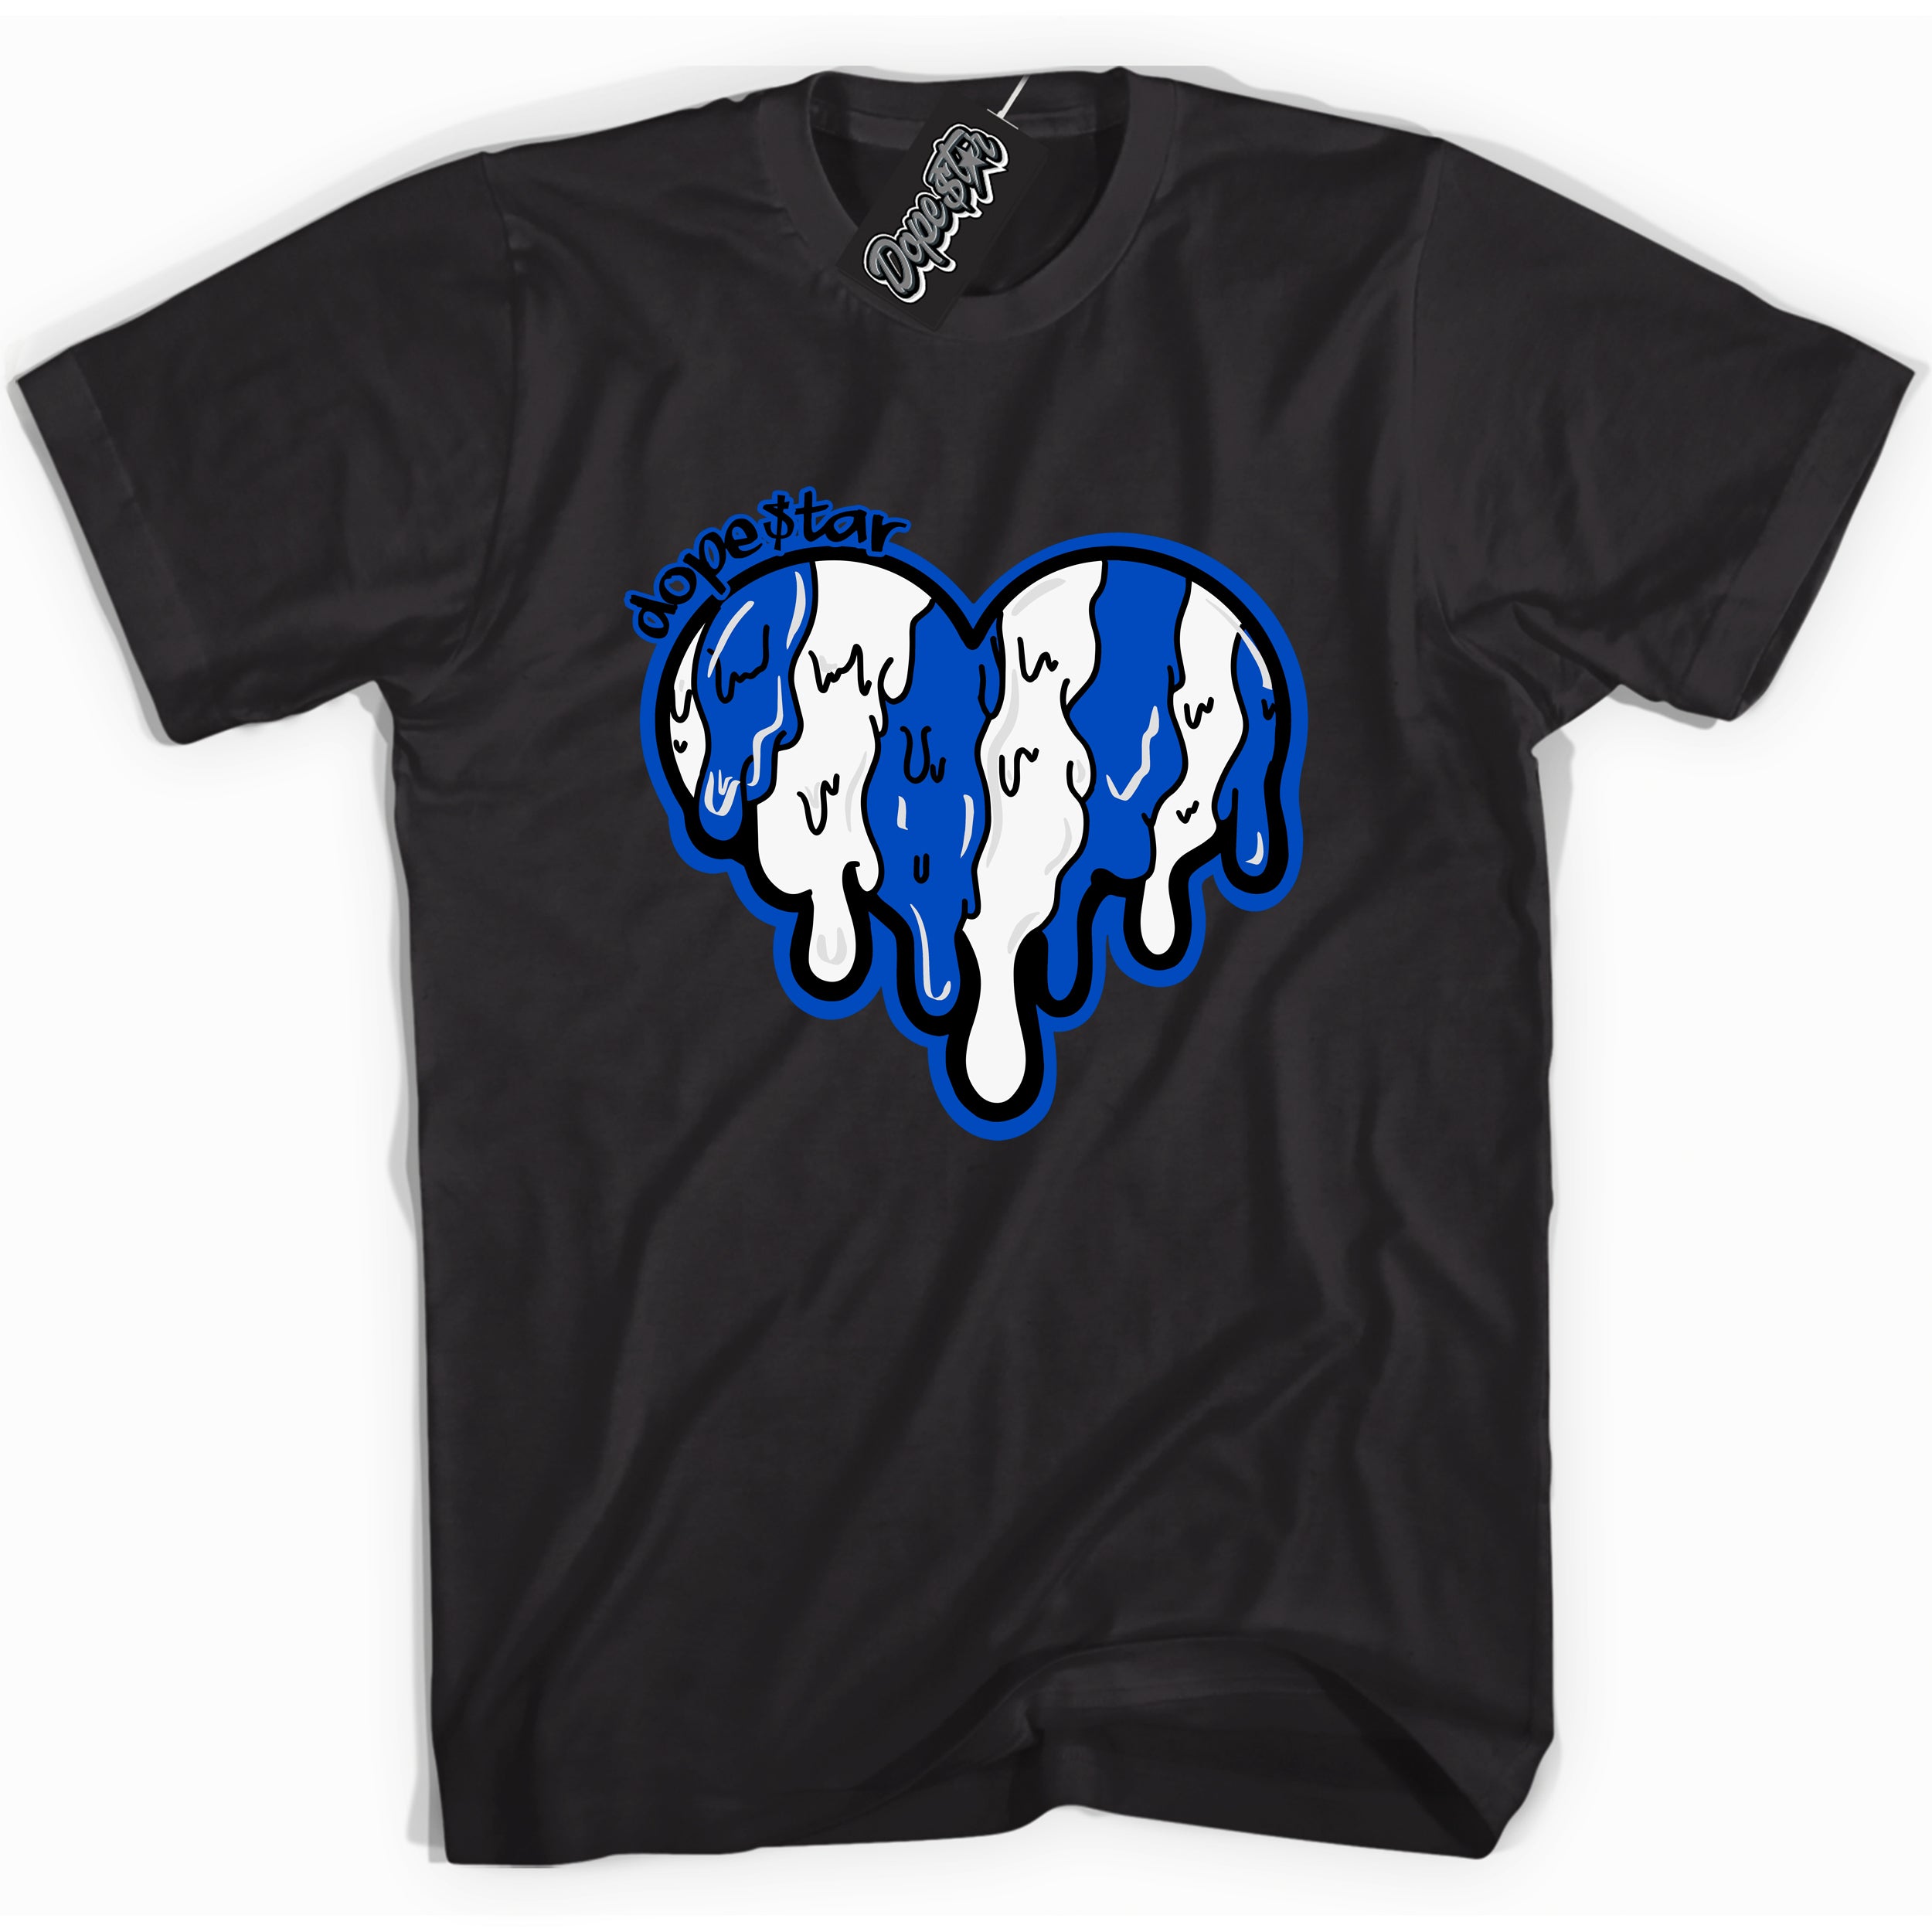 Cool Black graphic tee with Melting Heart print, that perfectly matches OG Royal Reimagined 1s sneakers 